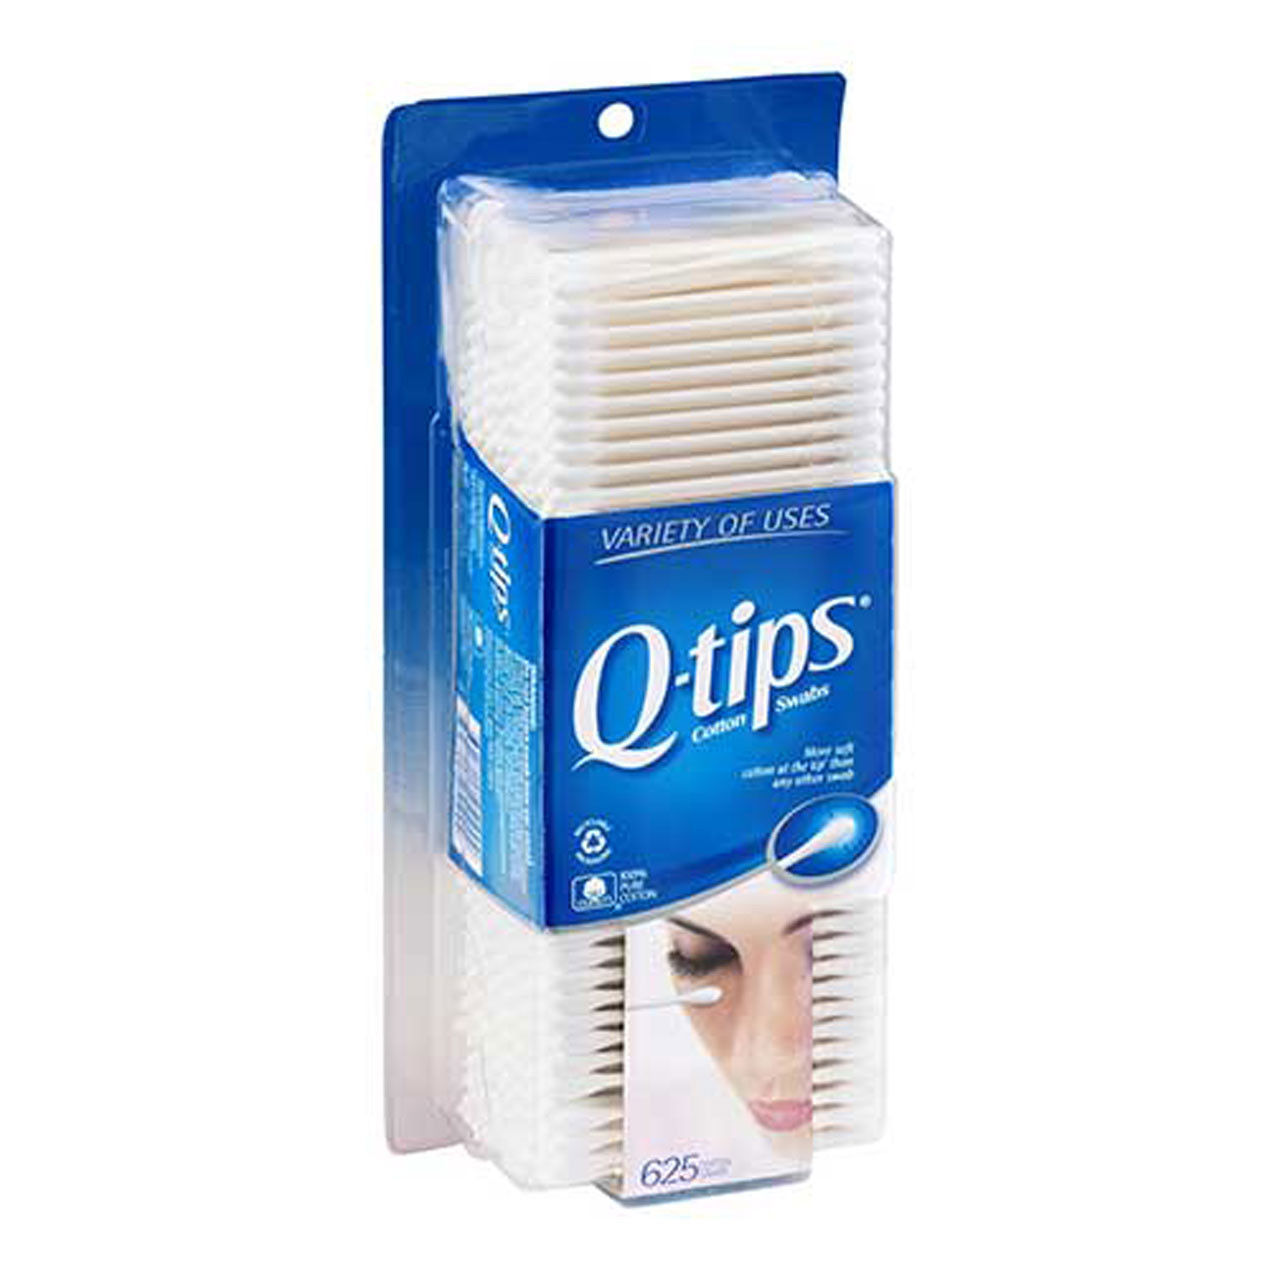 What can I use bulk cotton swabs for?